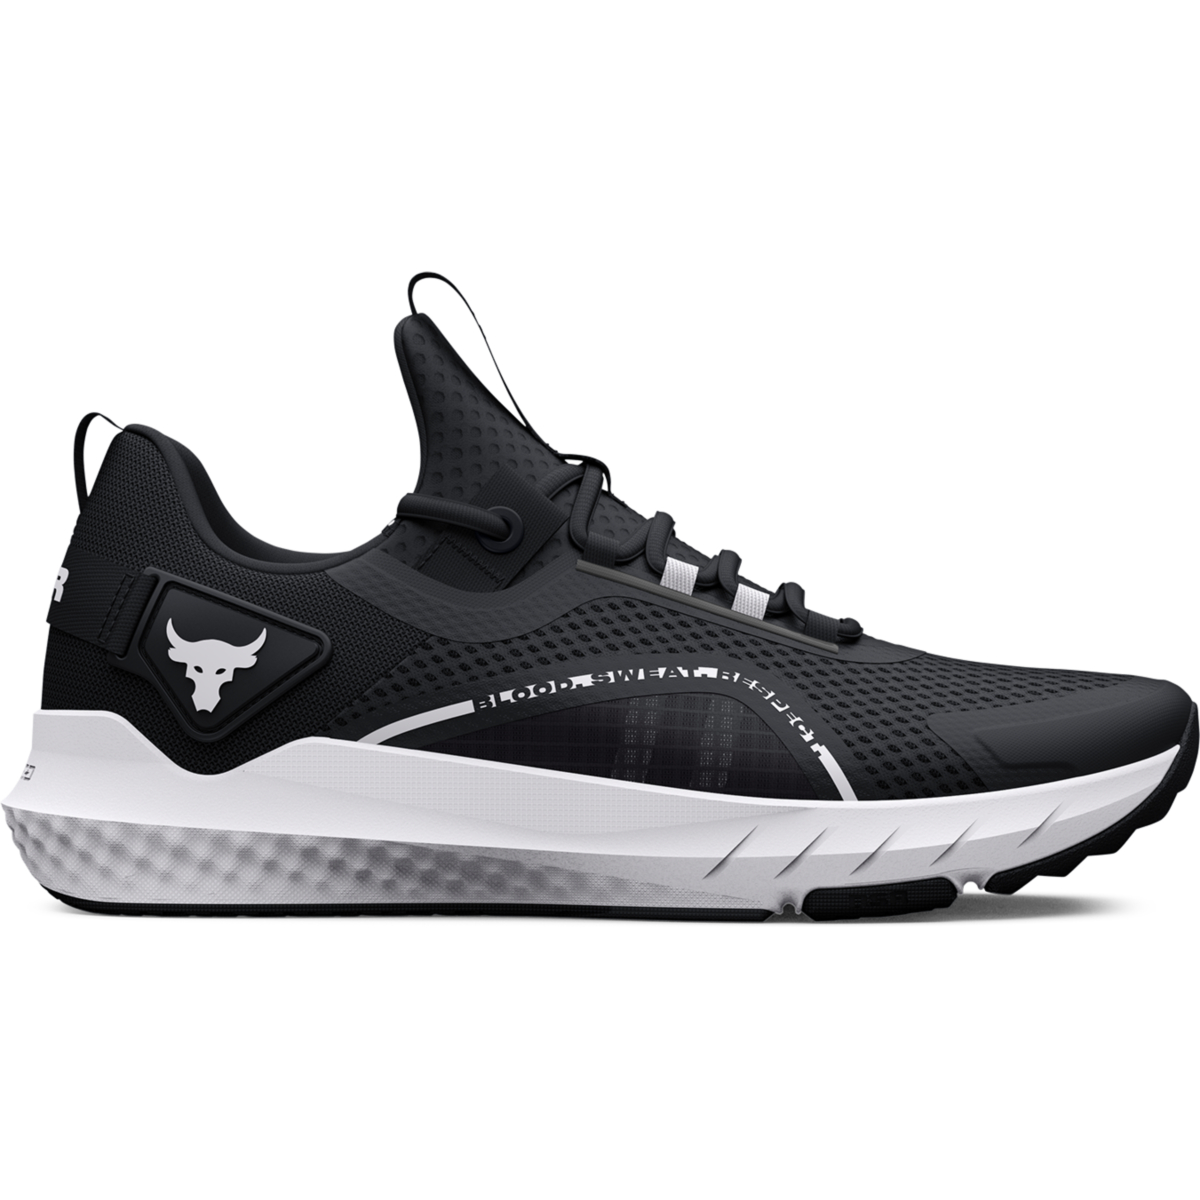 Under Armour - 3026462 UA PROJECT ROCK BSR 3 - 001/0073 Ανδρικά > Παπούτσια > Αθλητικά > Παπούτσι Low Cut